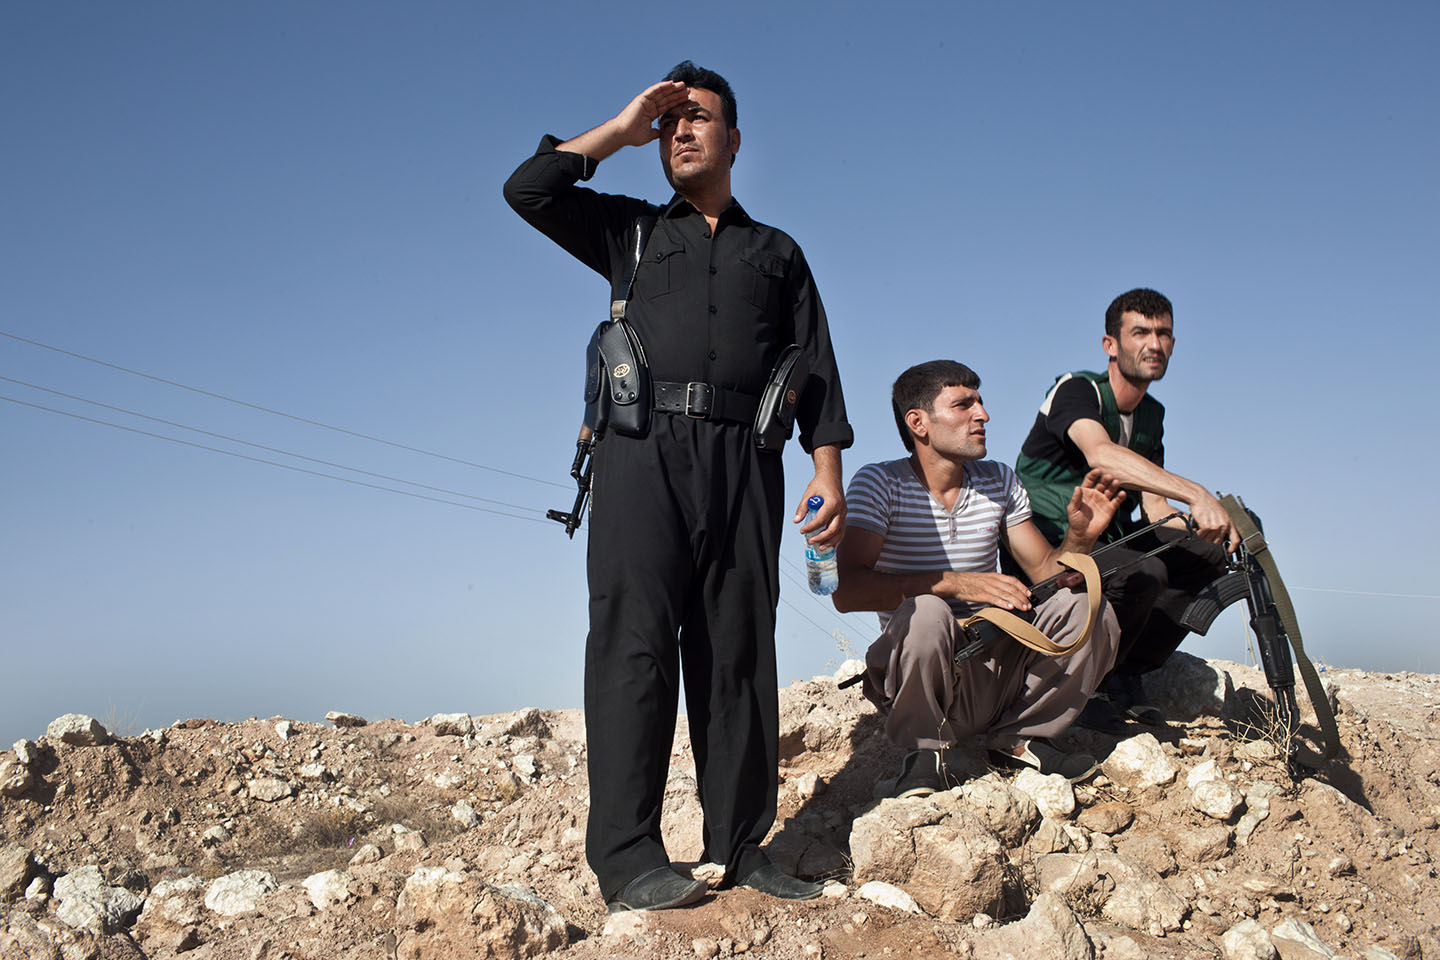 Kurdish military volunteers amass near the frontline on the outskirts of the town of Makhmor, 35 miles south of Irbil, the capital of the Kurdish Region of Iraq (KRI), on August 9, 2014.